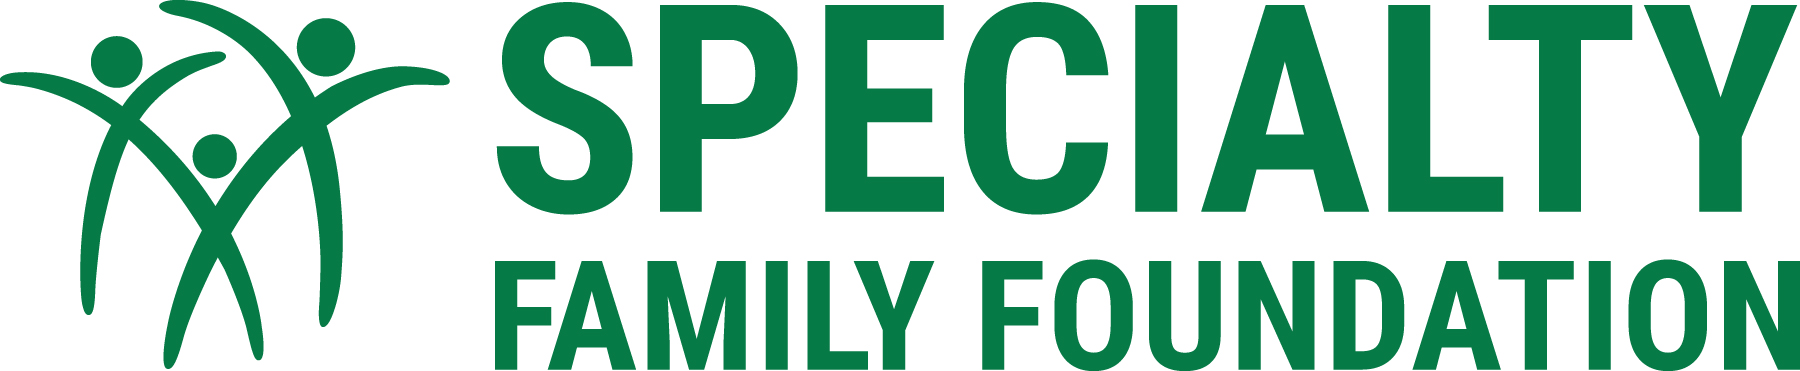 The Specialty Family Foundation